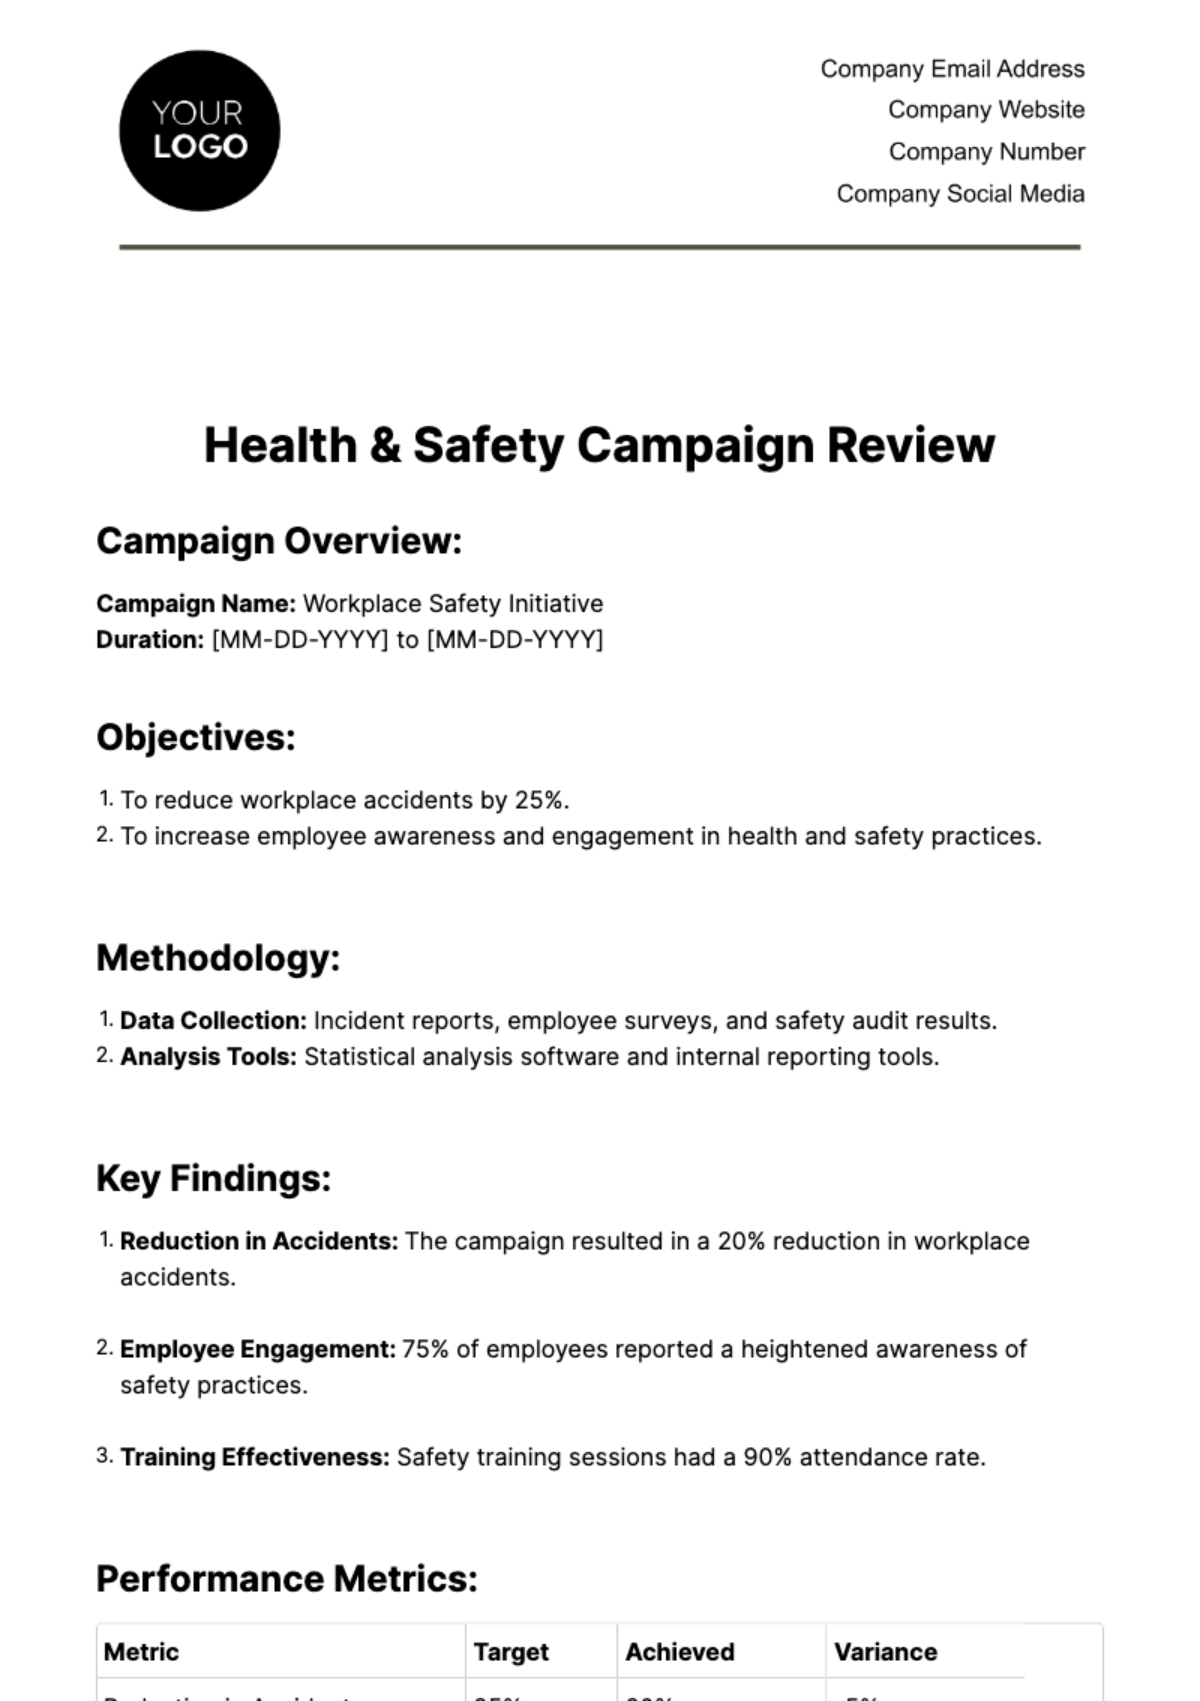 Free Health & Safety Campaign Review Template